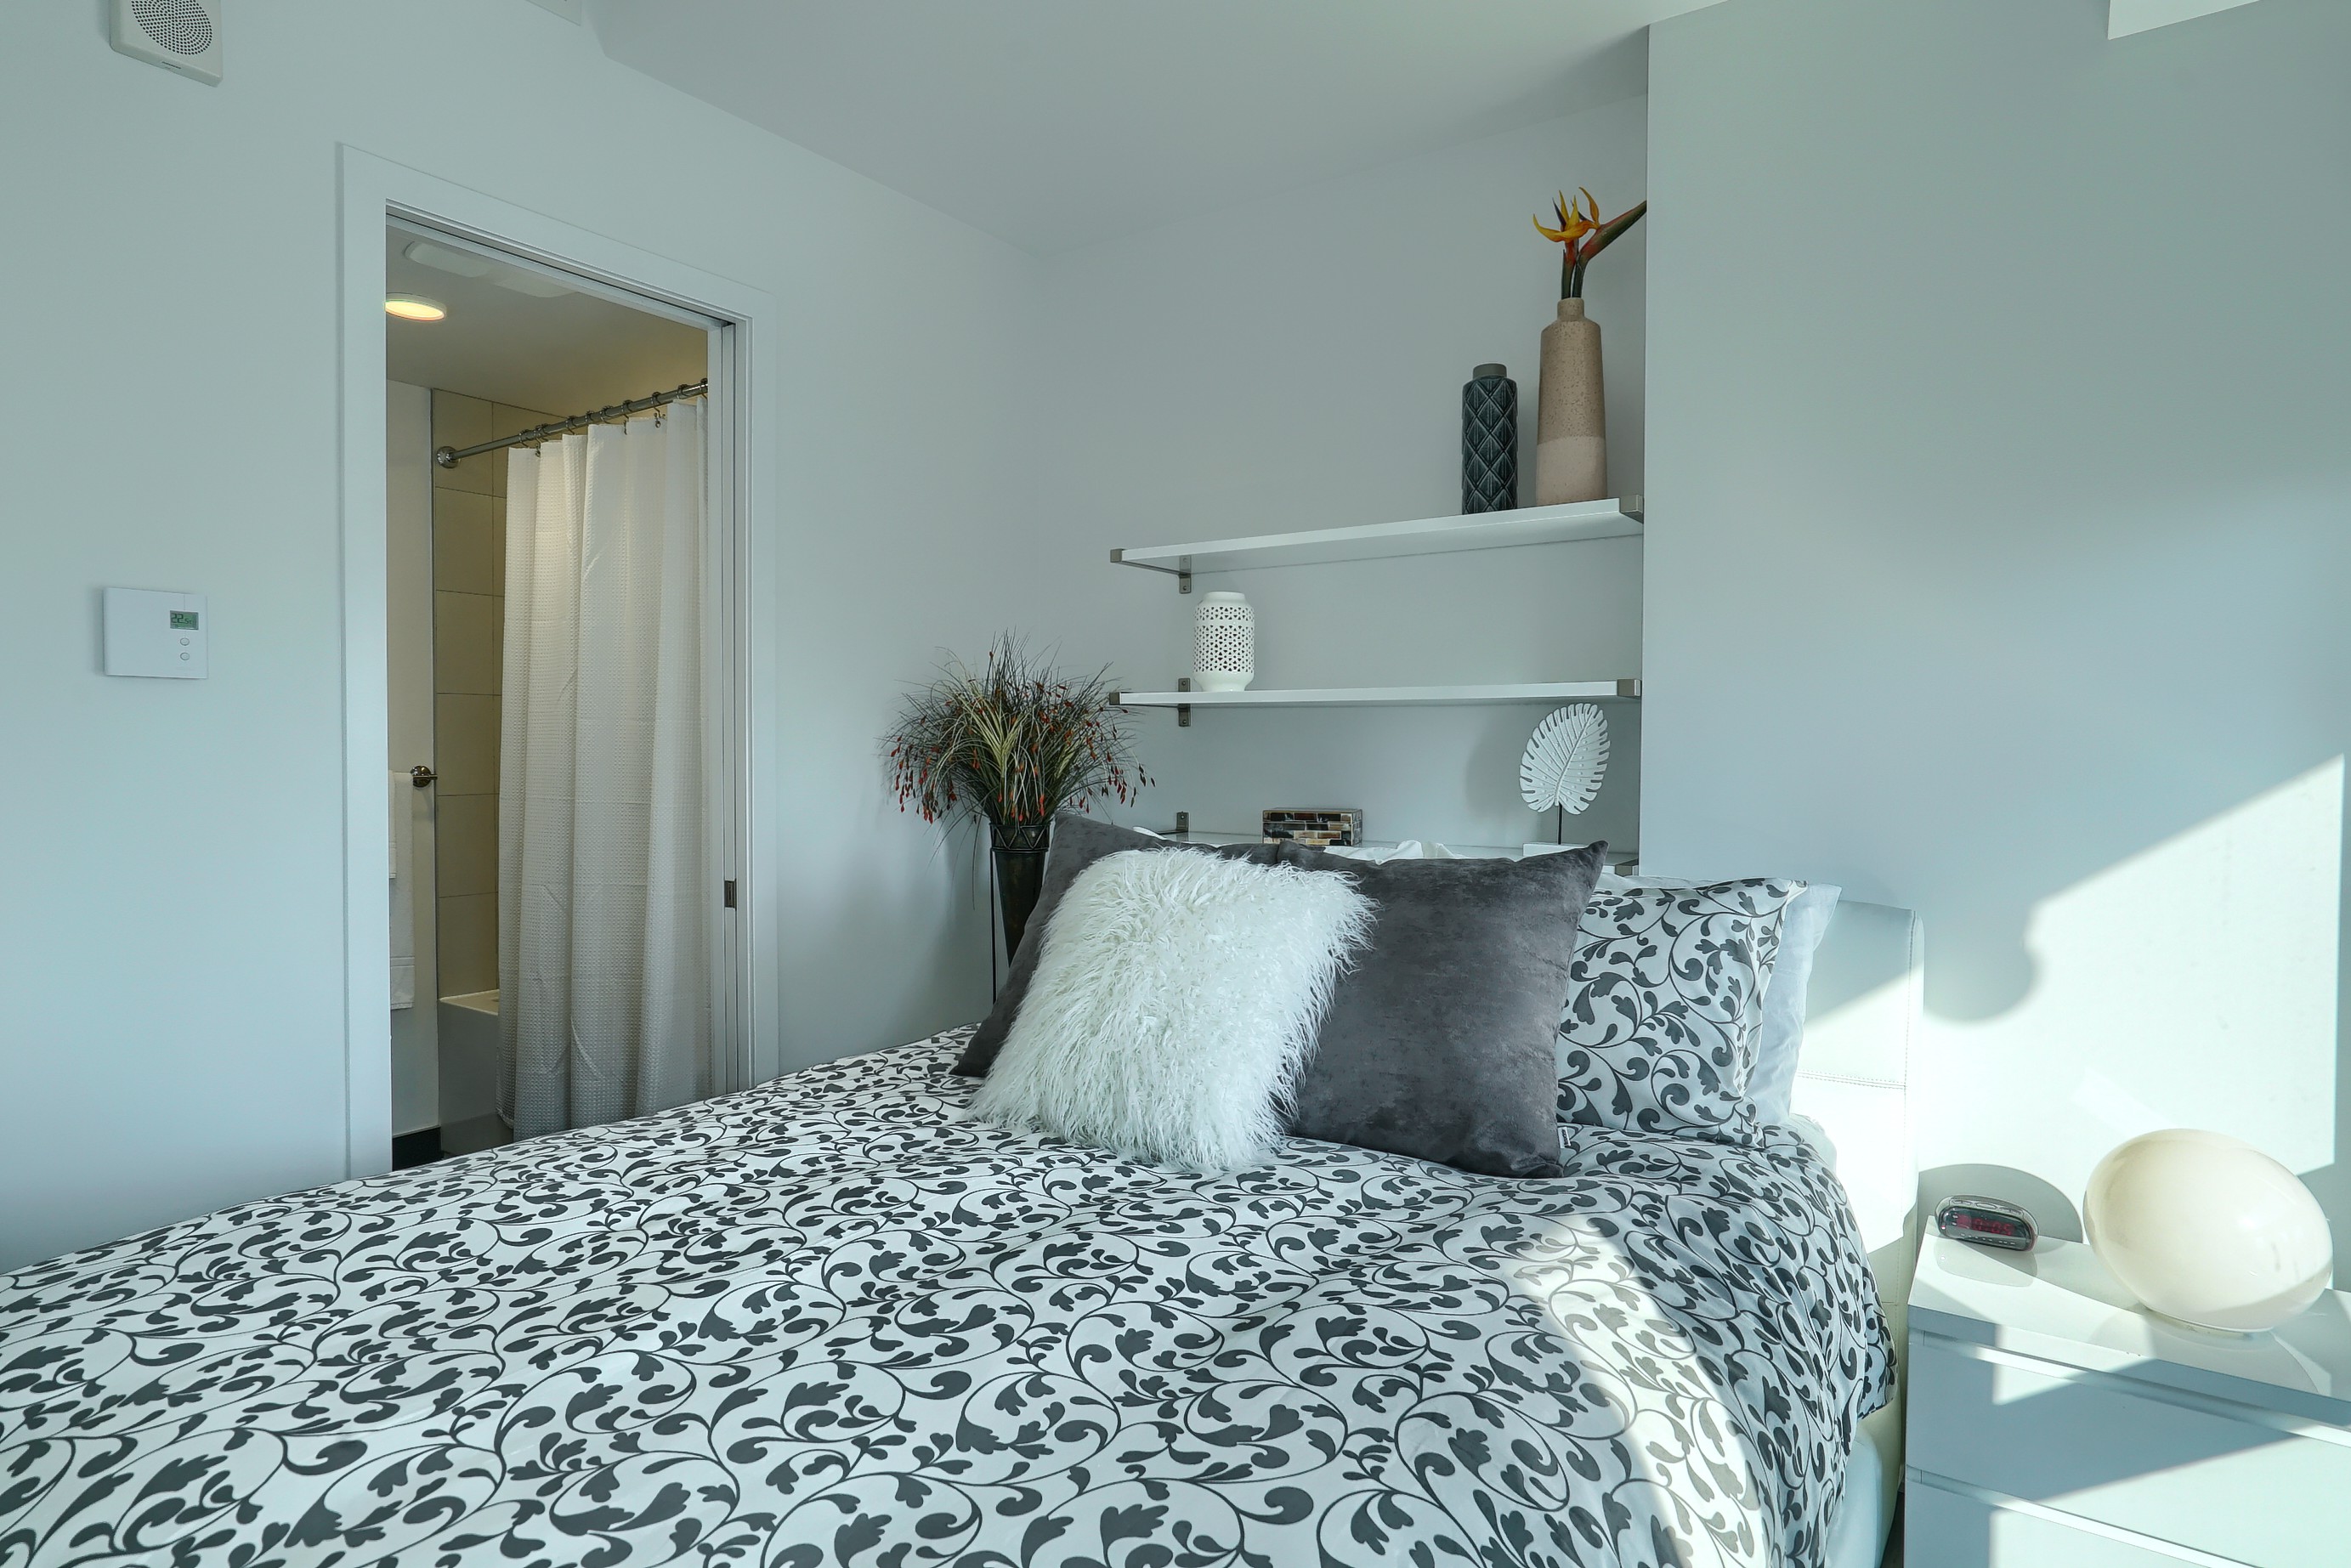 Uniquely designed bedroom with queen-sized bed, plush bedding with white and gray fluffy pillows to accent. White shelving and white drawers enhance this luxury furnished temporary housing apartment in Montreal